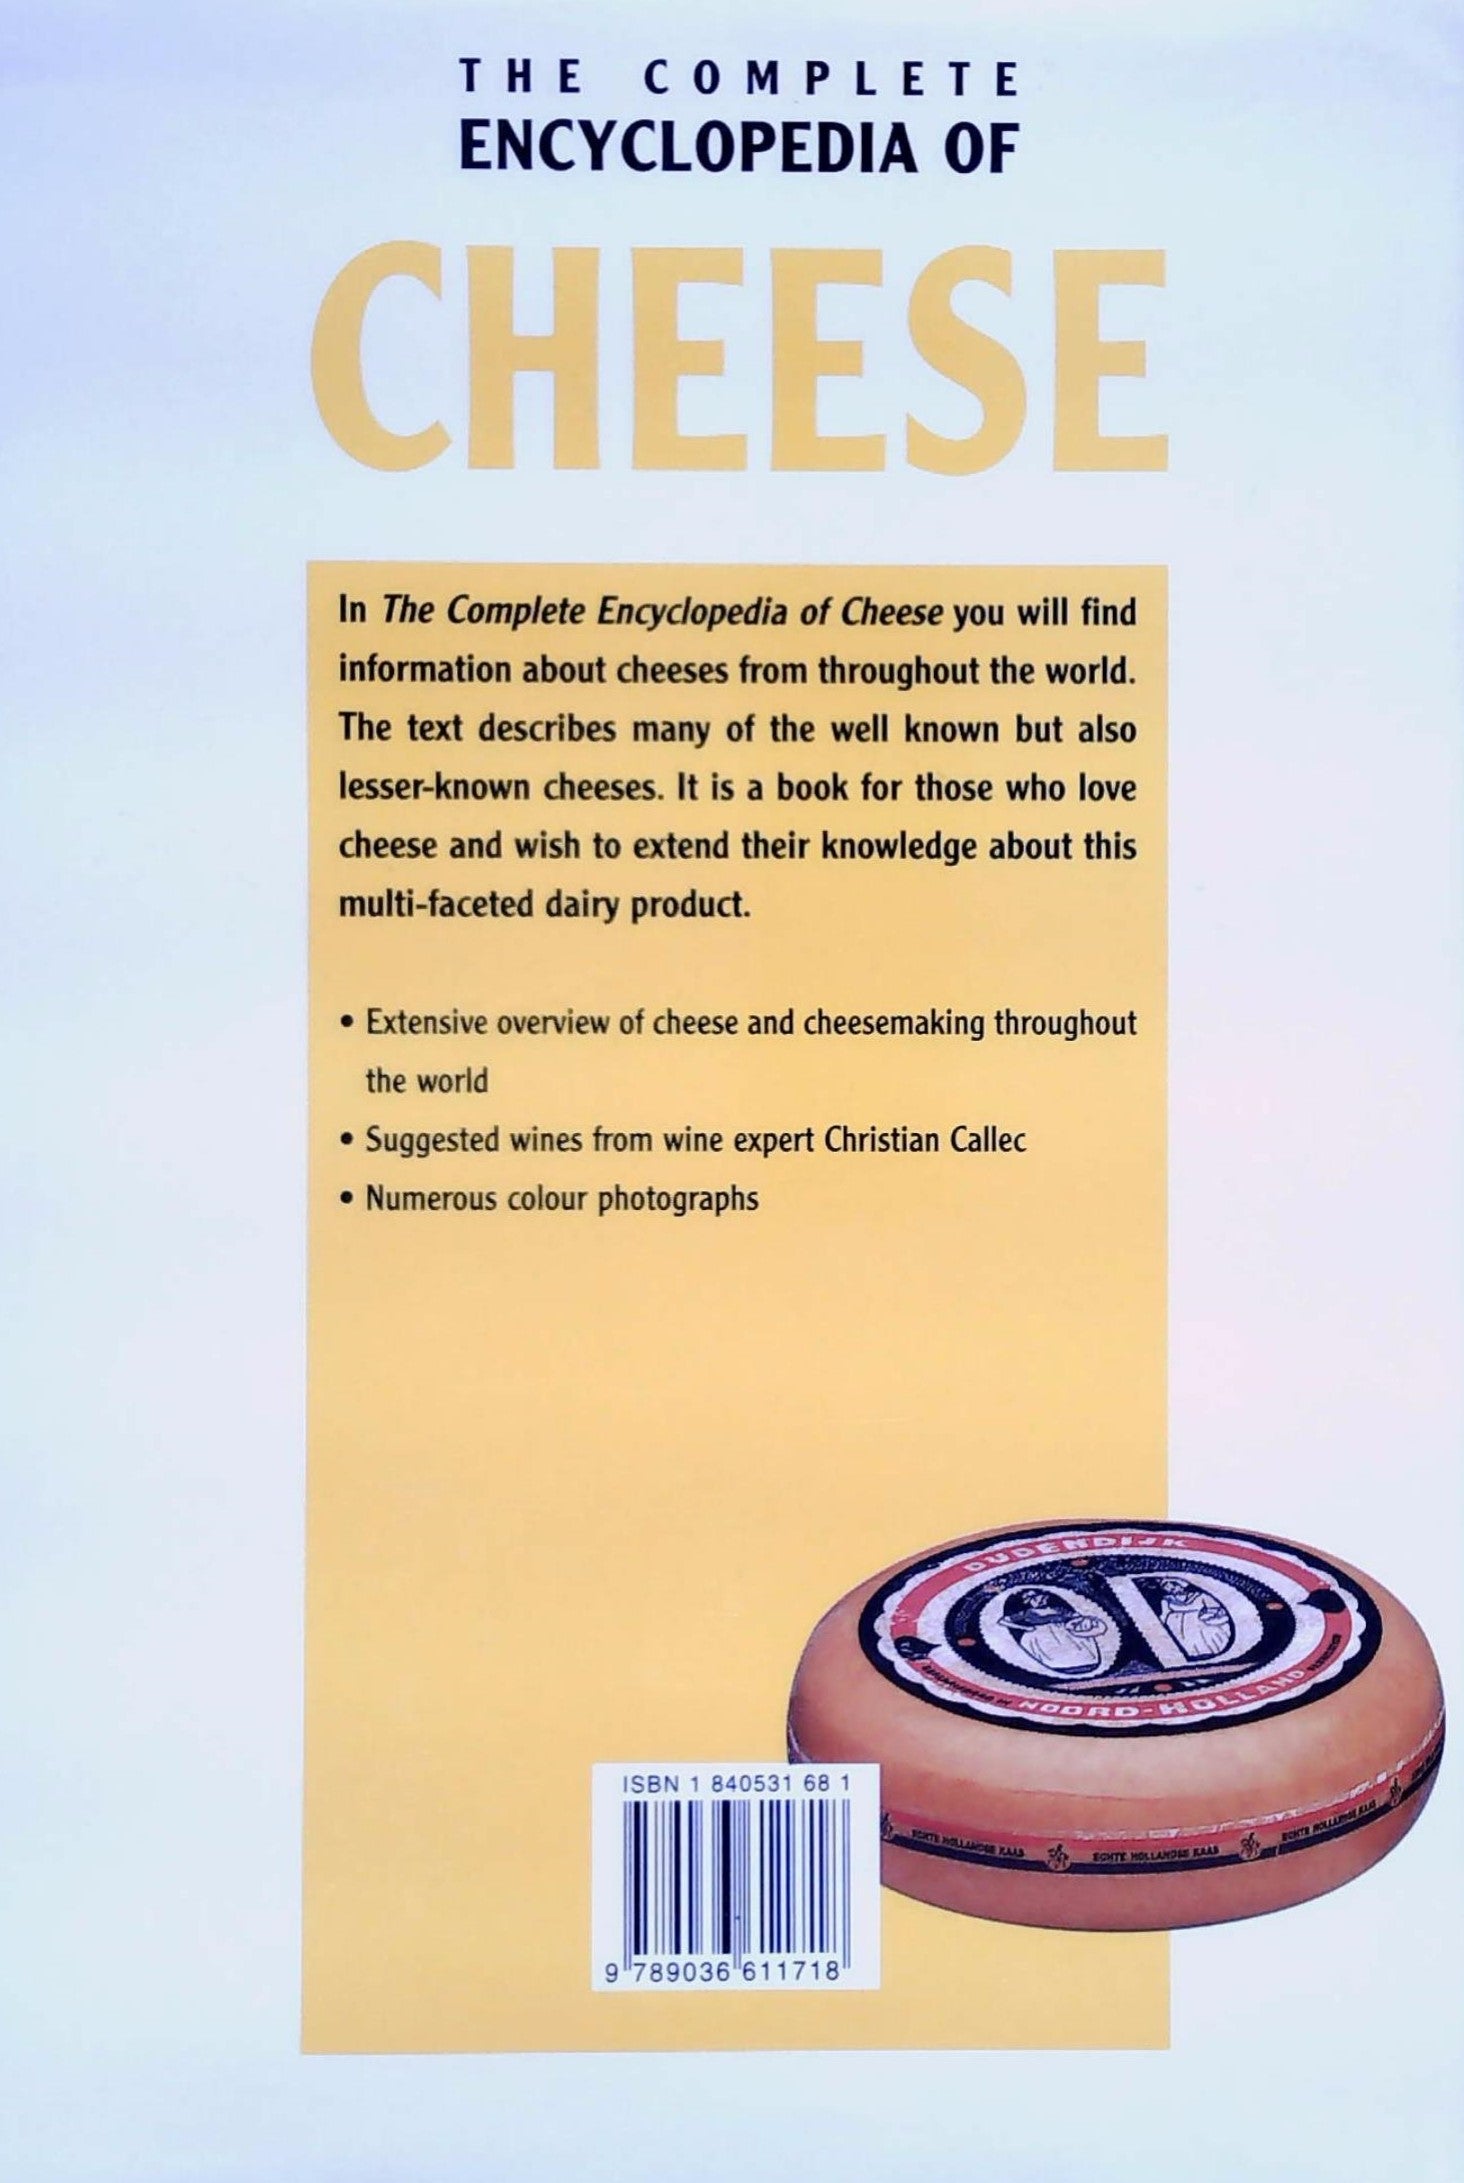 The complete encyclopedia of cheese (Christian Callec)